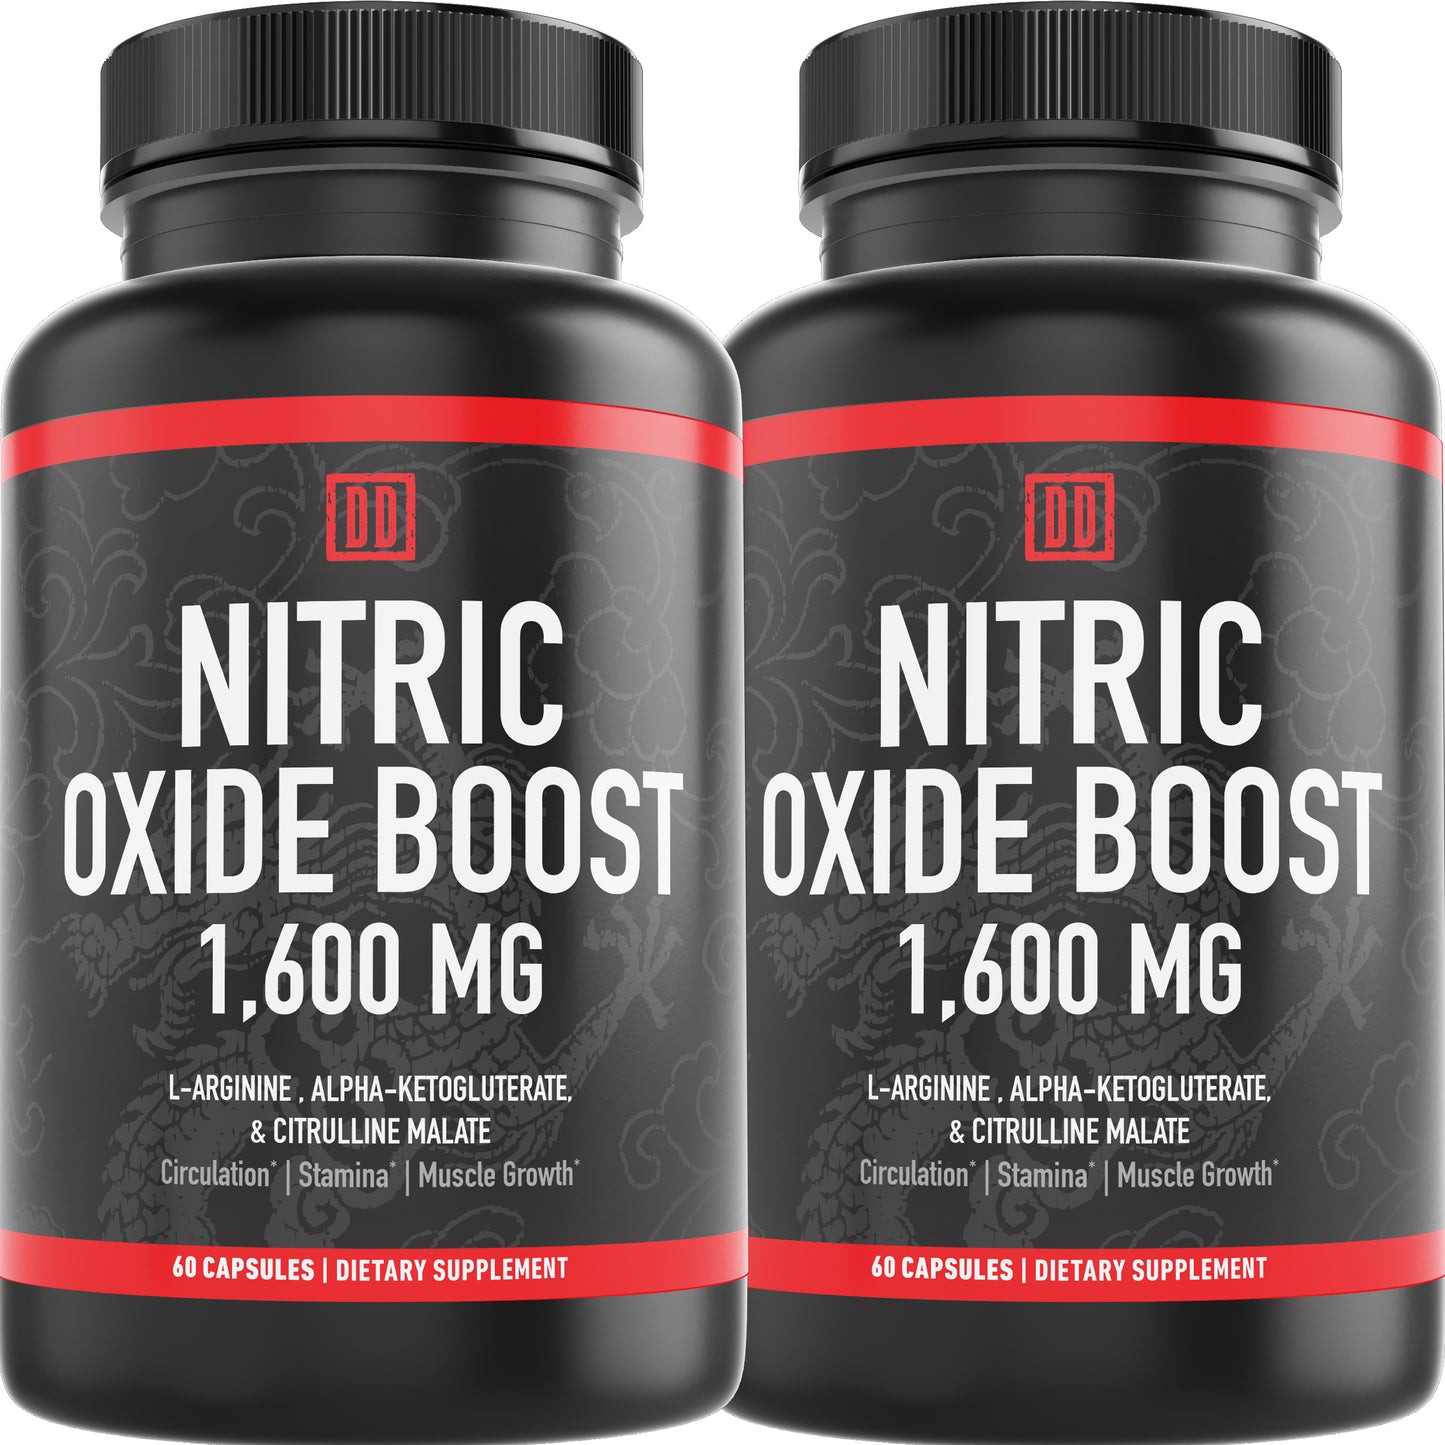 Nitric Oxide Booster 1600mg (2 Pack)